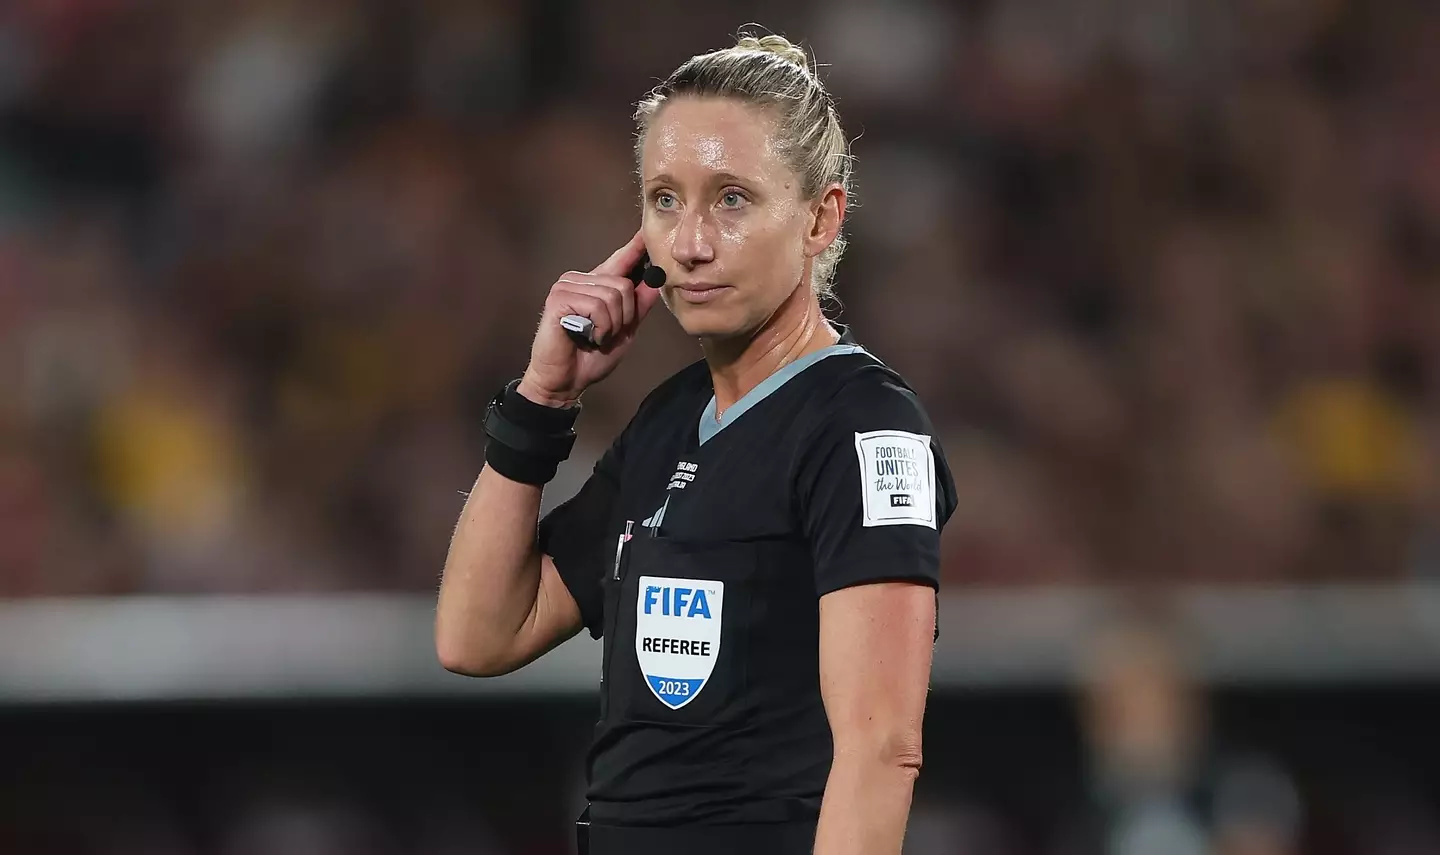 Referees have microphones, so why can't they use them to announce big decisions?